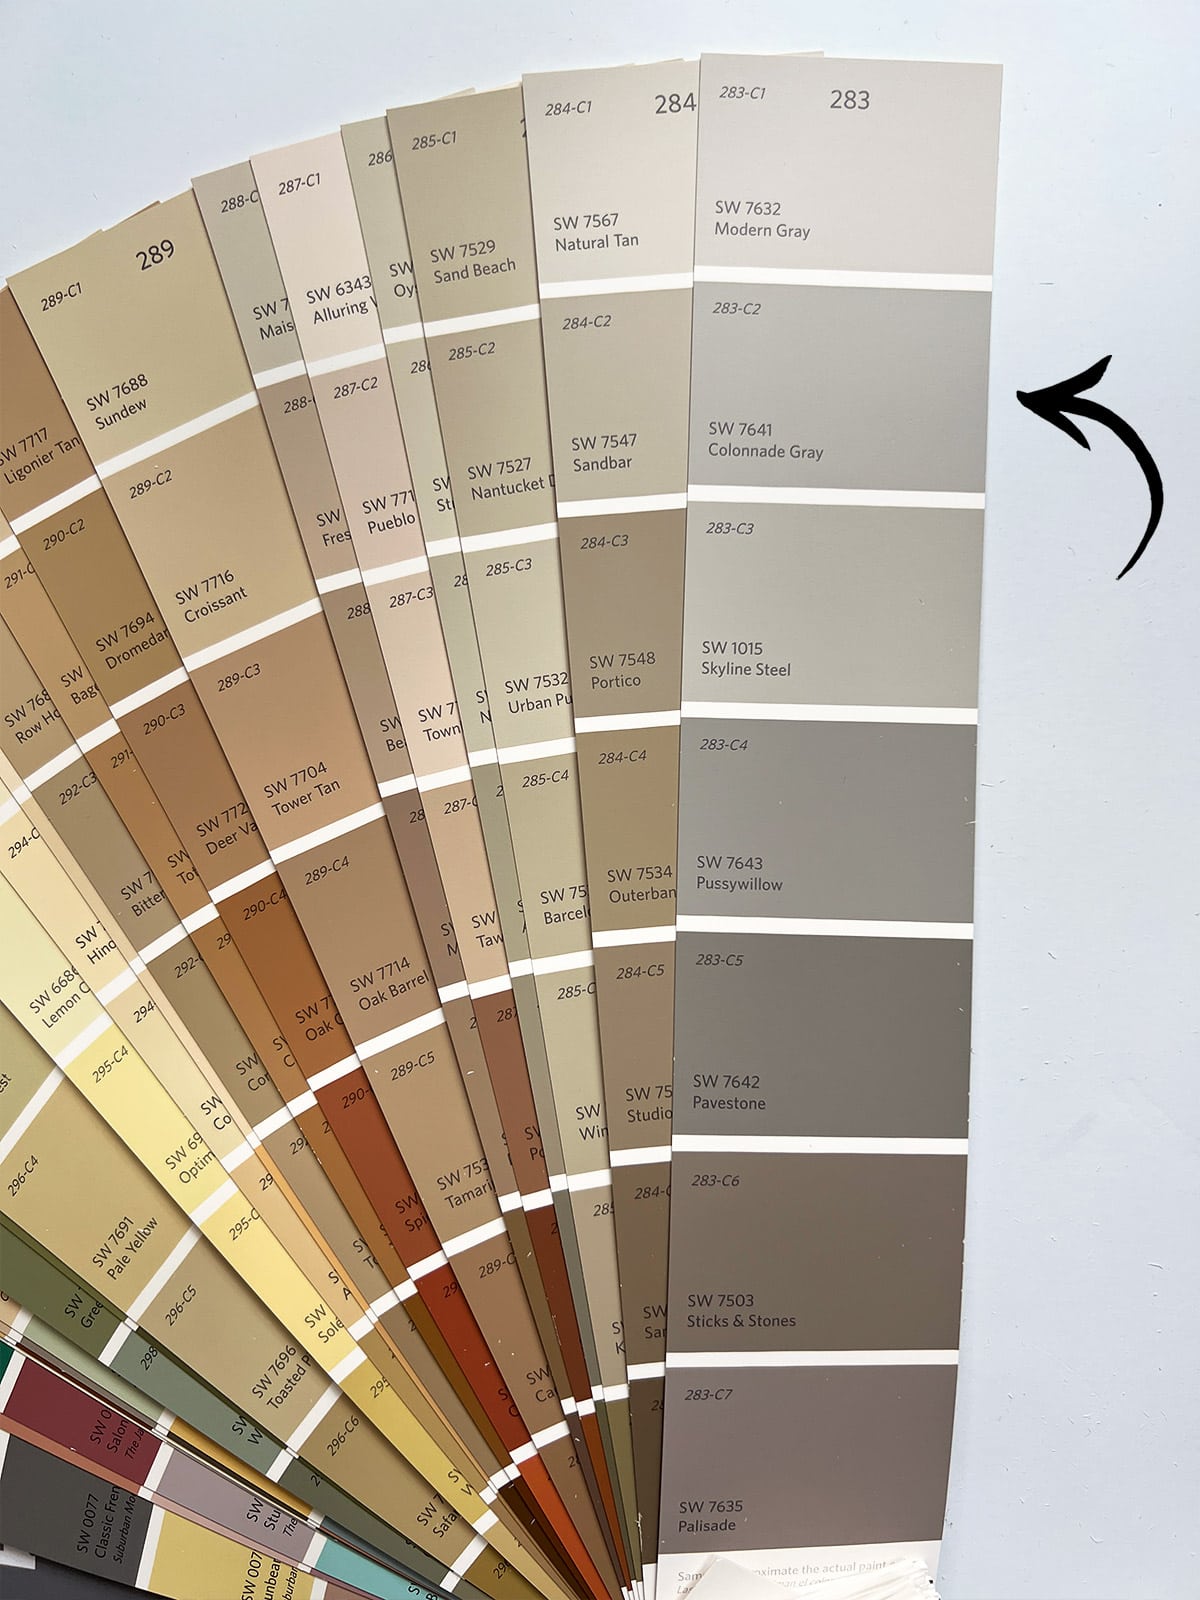 I will be going for between light khaki (5) and grant beige (1).  Light  beige paint colors, Beige paint colors, Paint colors for home